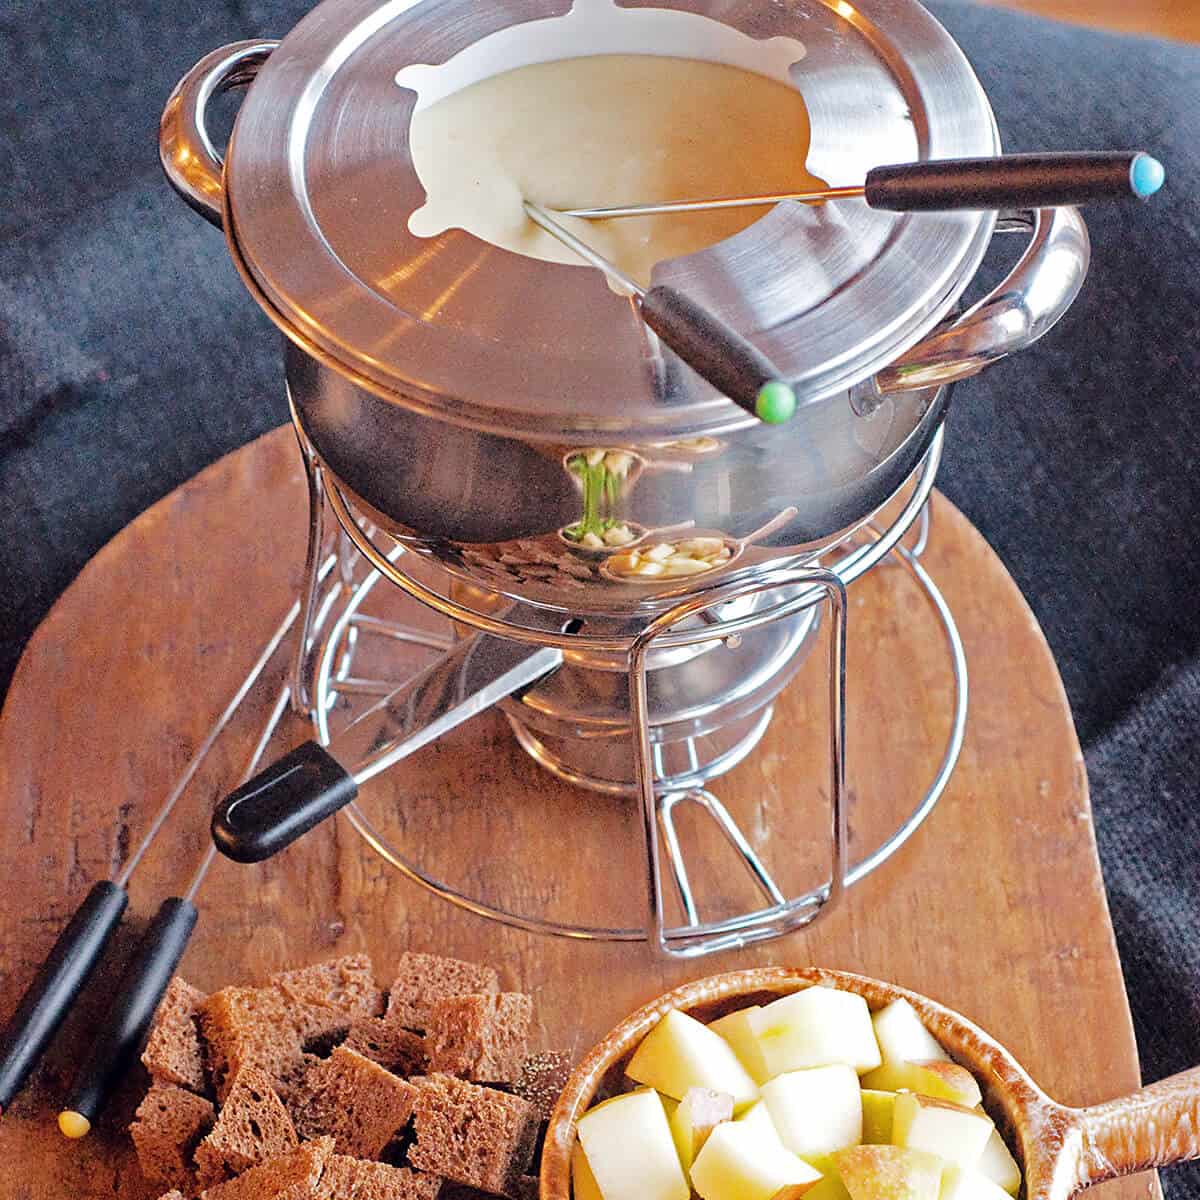 Cheese fondue in pot with bread and vegetable dippers.